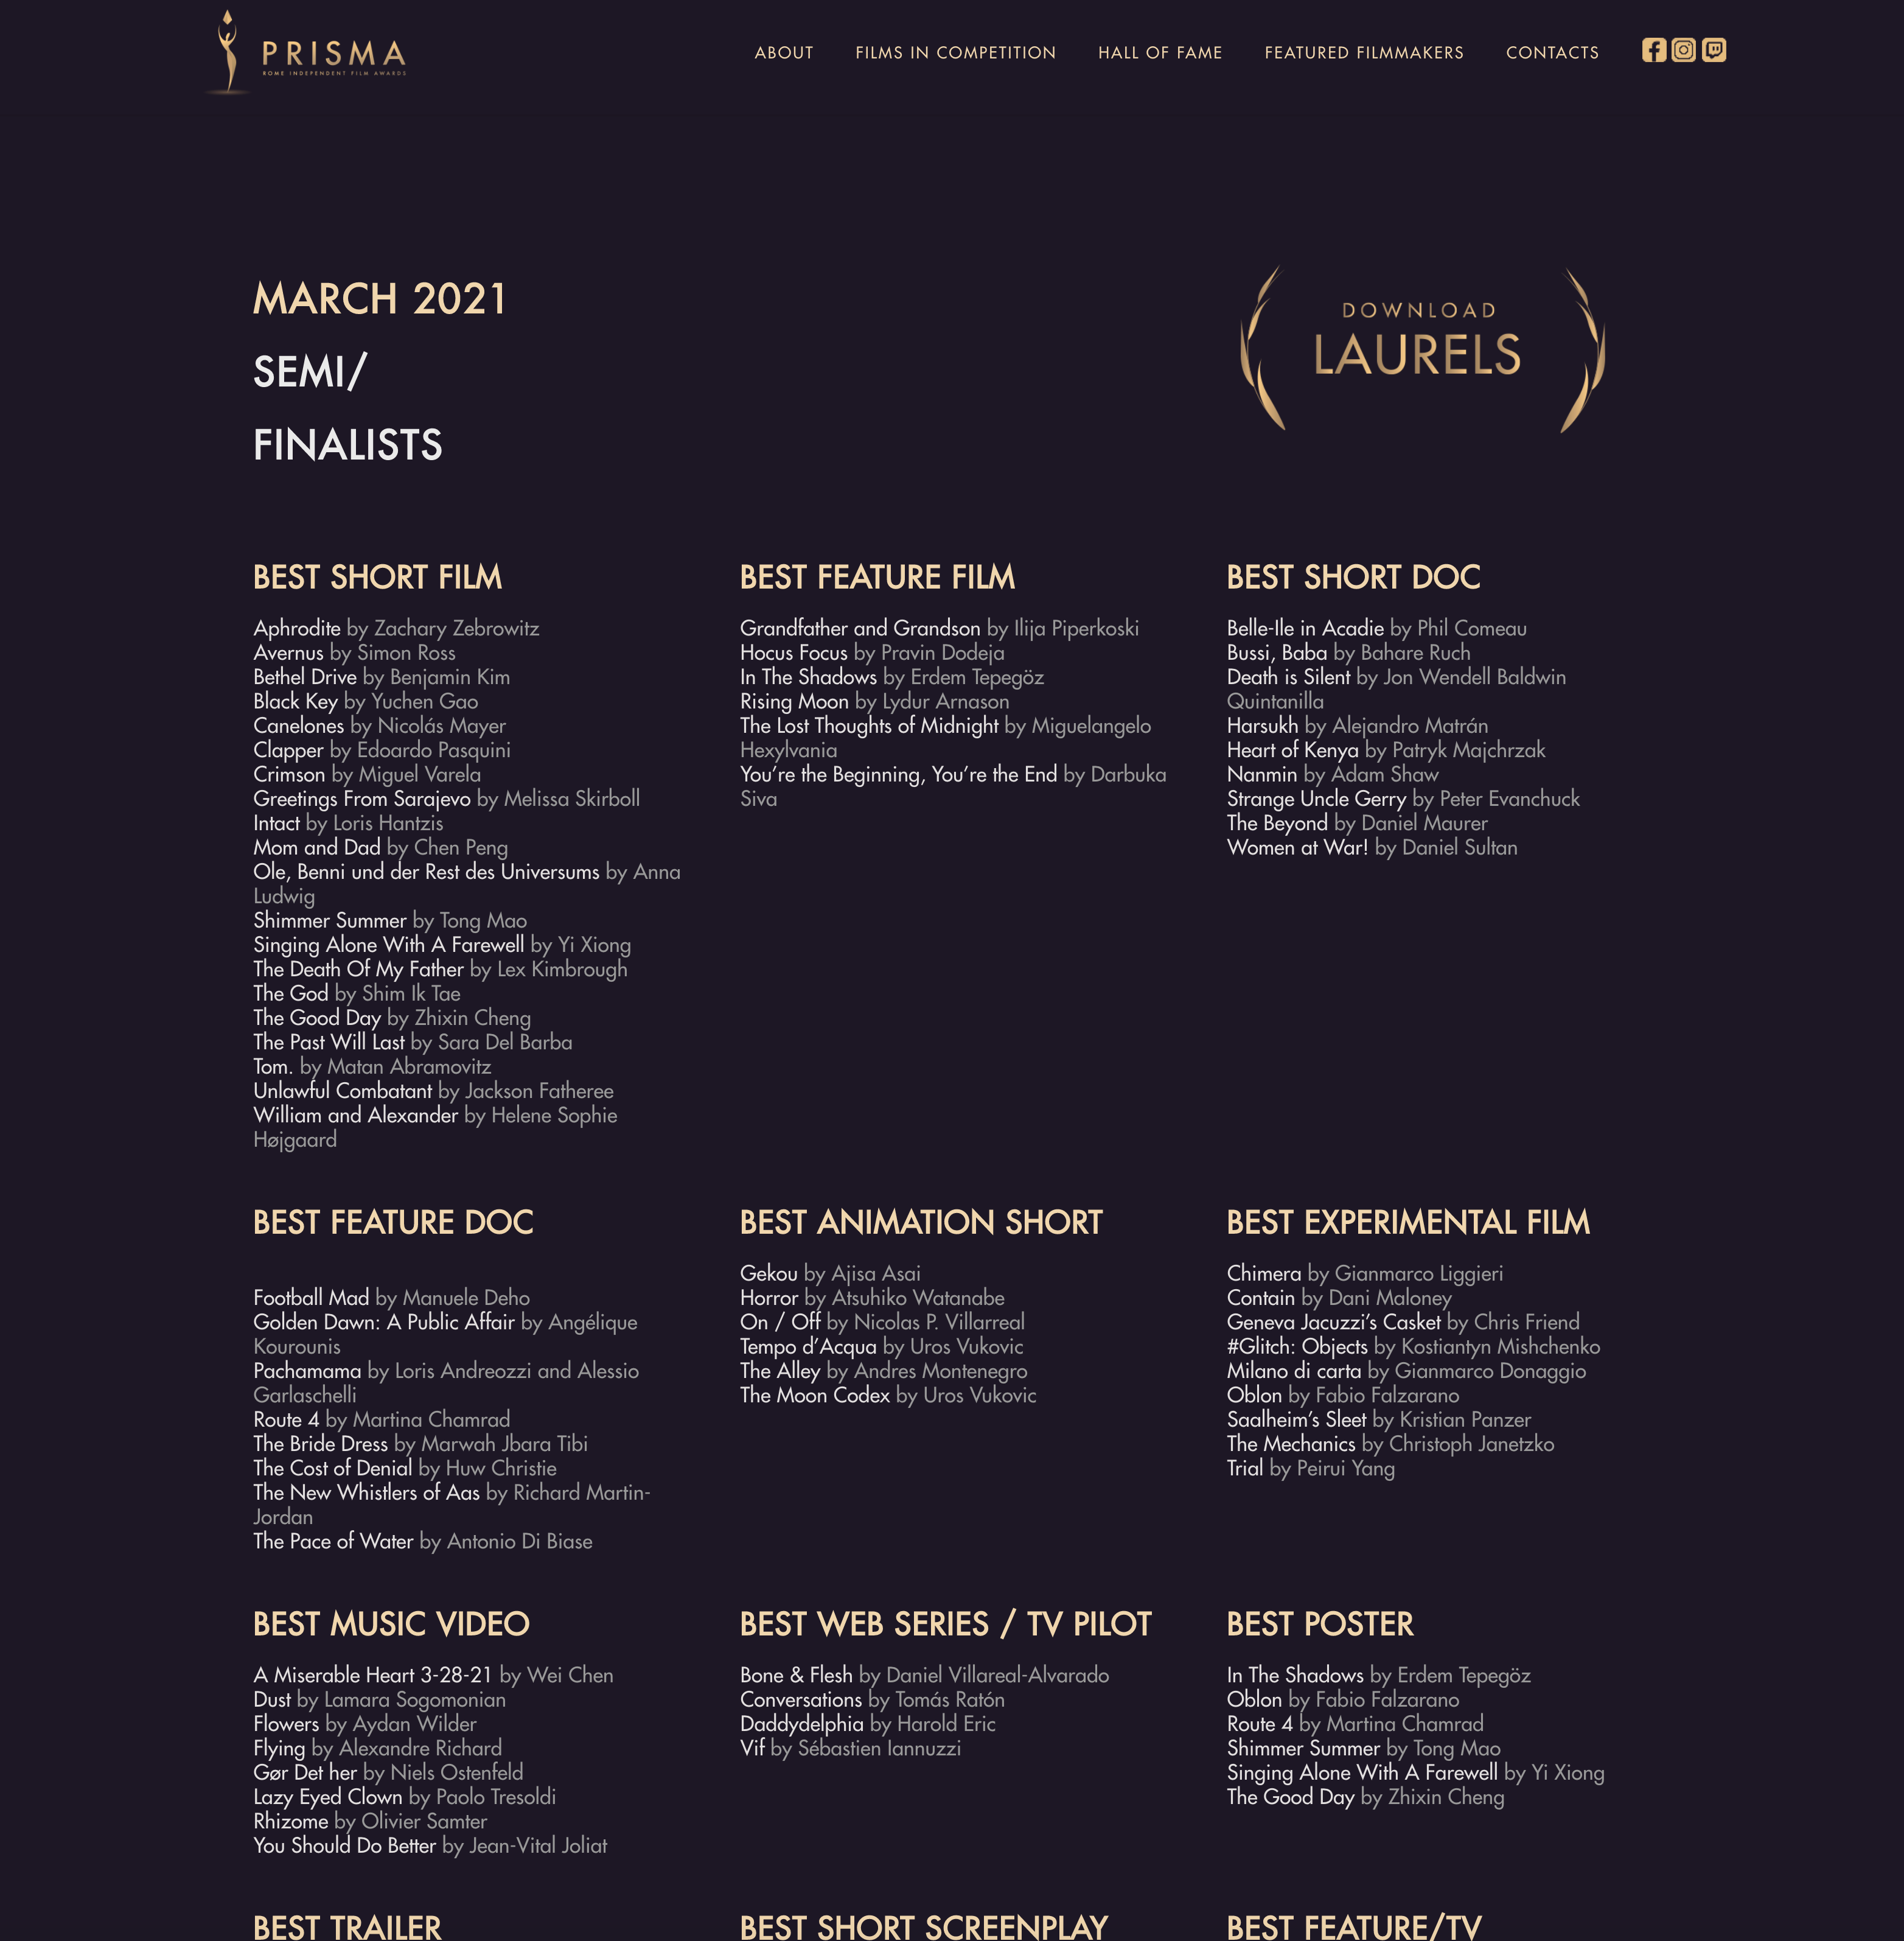 Screenshot of the Roma Film Festival Program showing the semi finalists, including the short The Alley